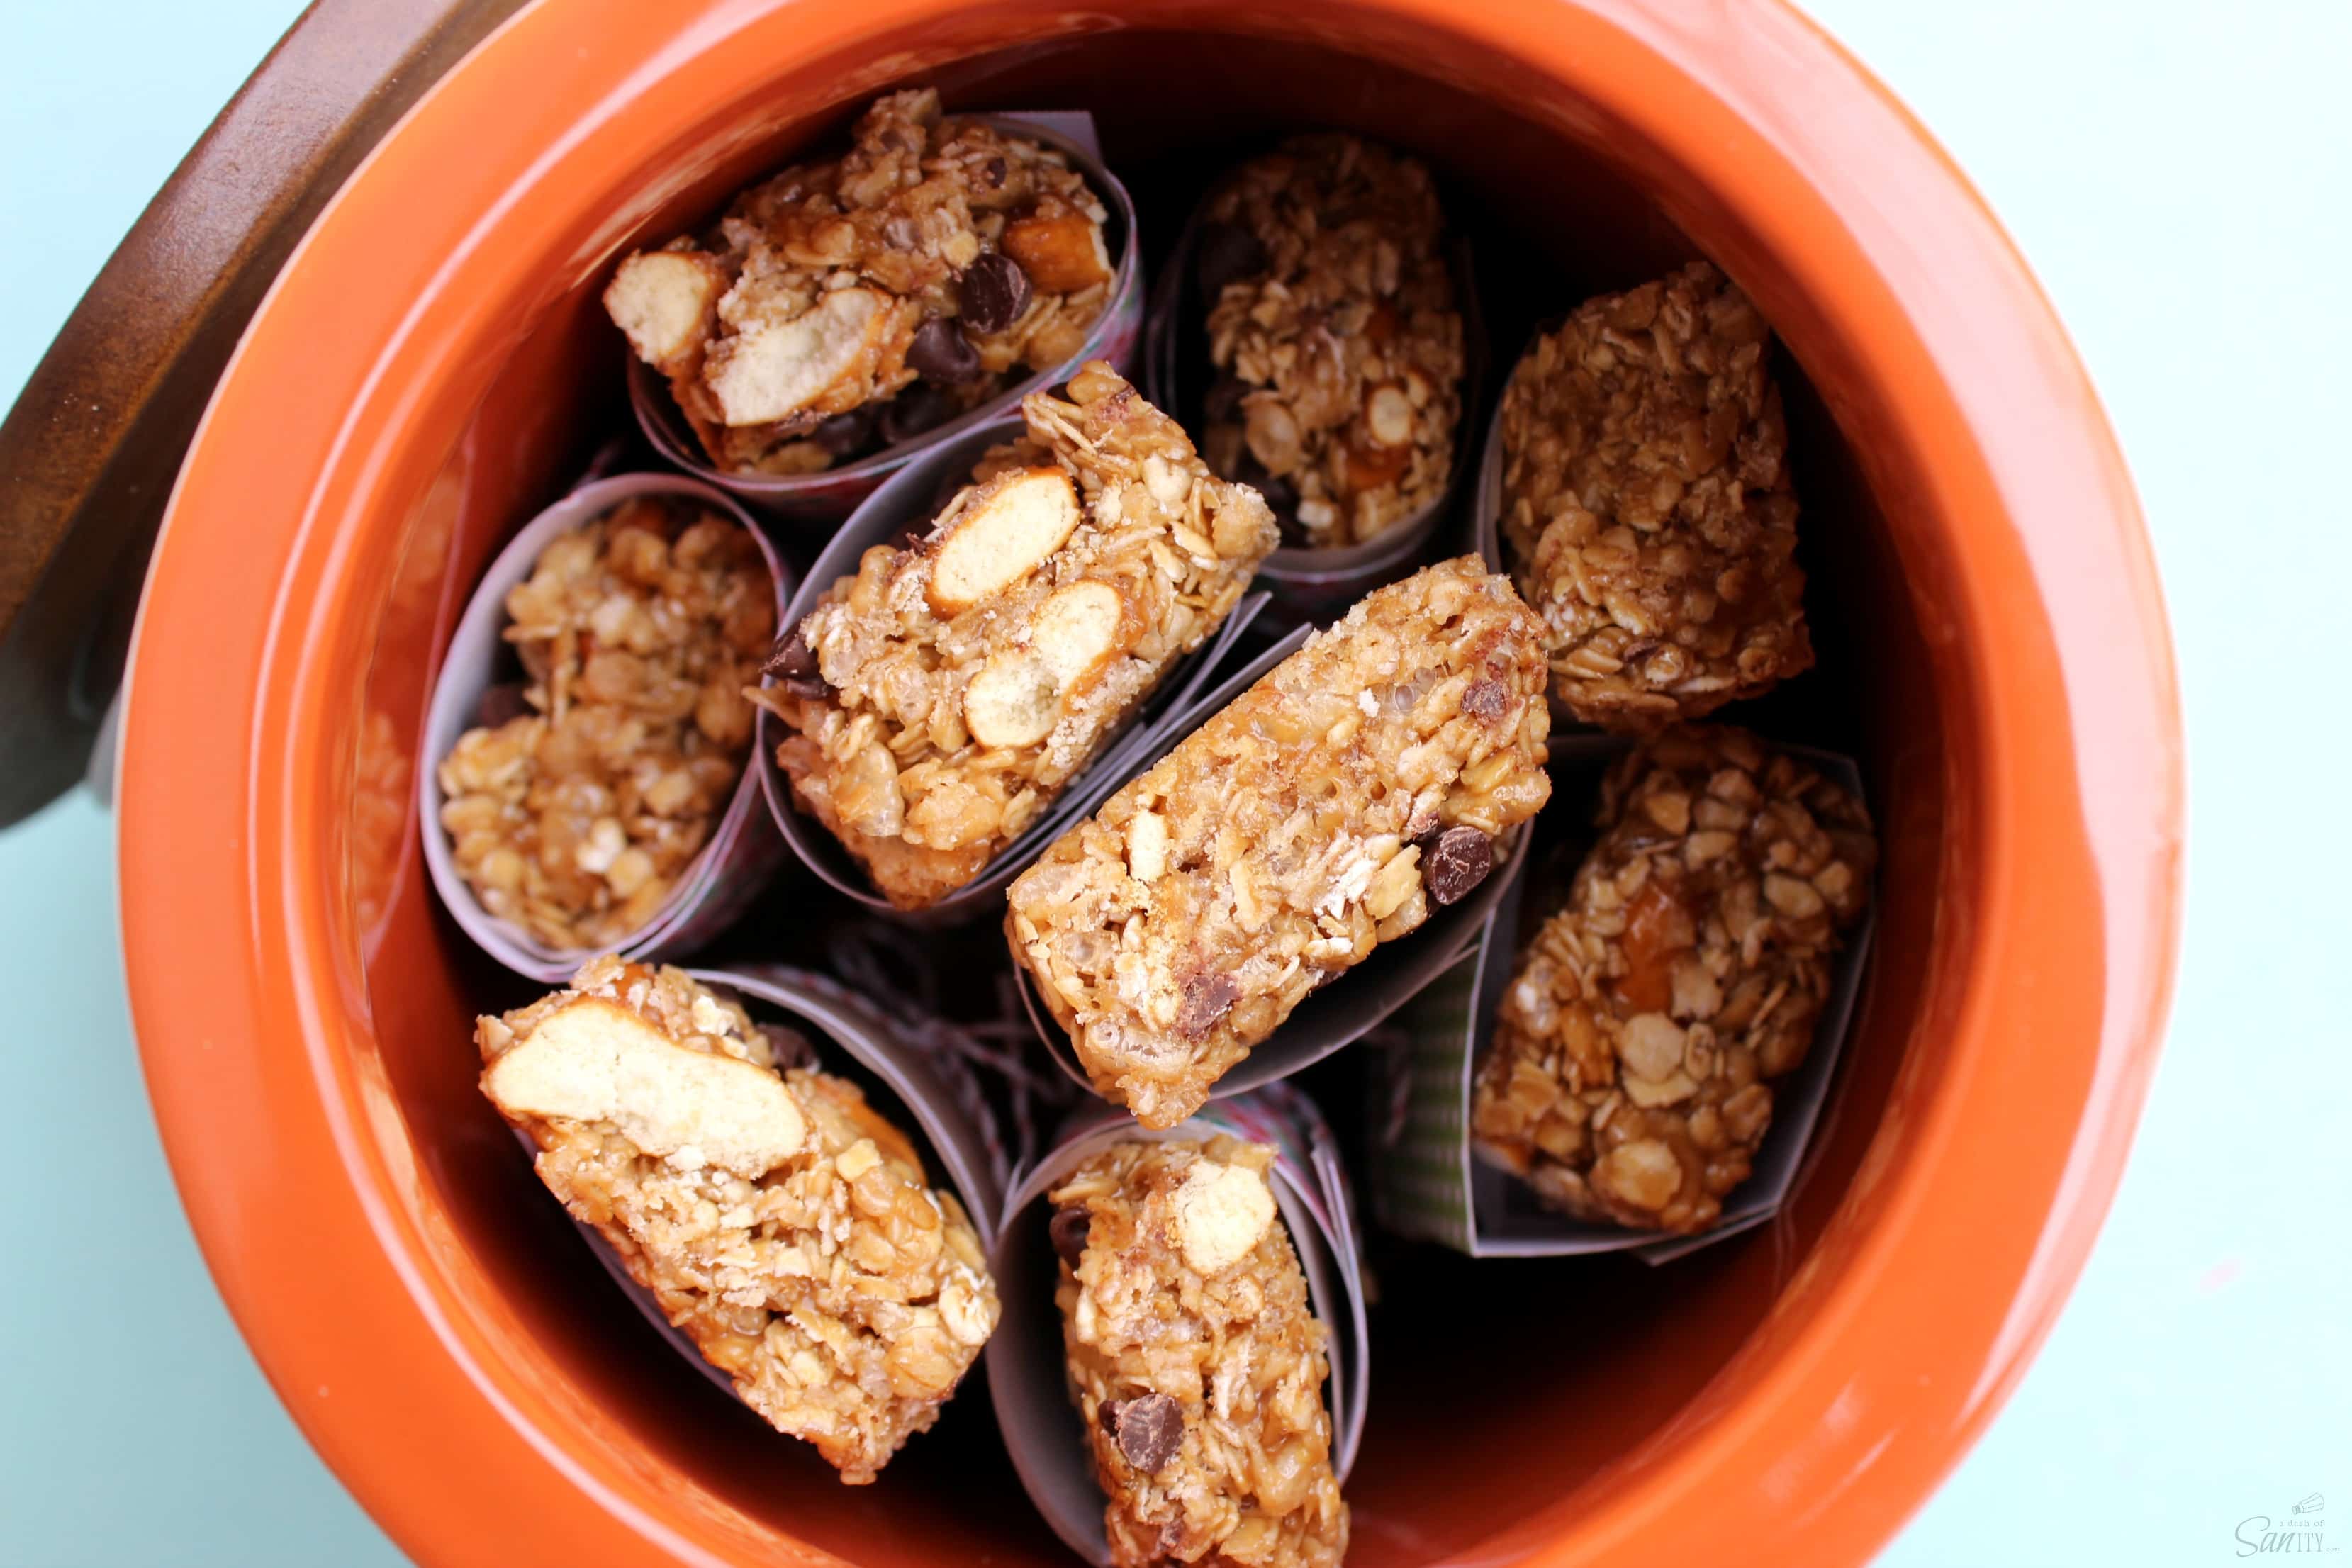 These Chewy Pretzel Peanut Butter Granola Bars are a simple and easy snack to make, prepared in less than 20 minutes. The kids are going to love this snack! bowl